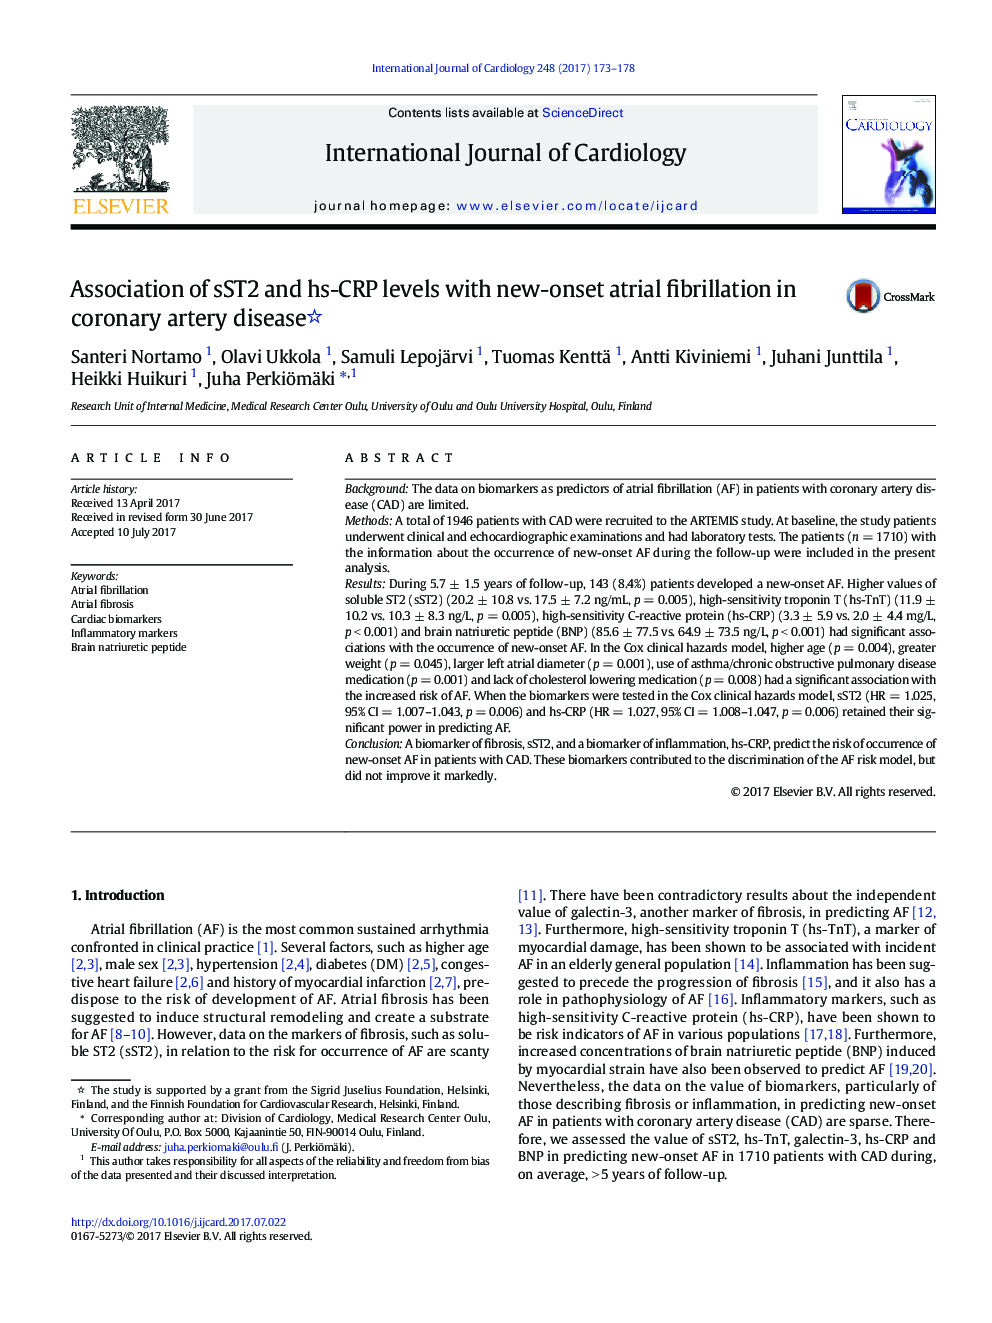 Association of sST2 and hs-CRP levels with new-onset atrial fibrillation in coronary artery disease